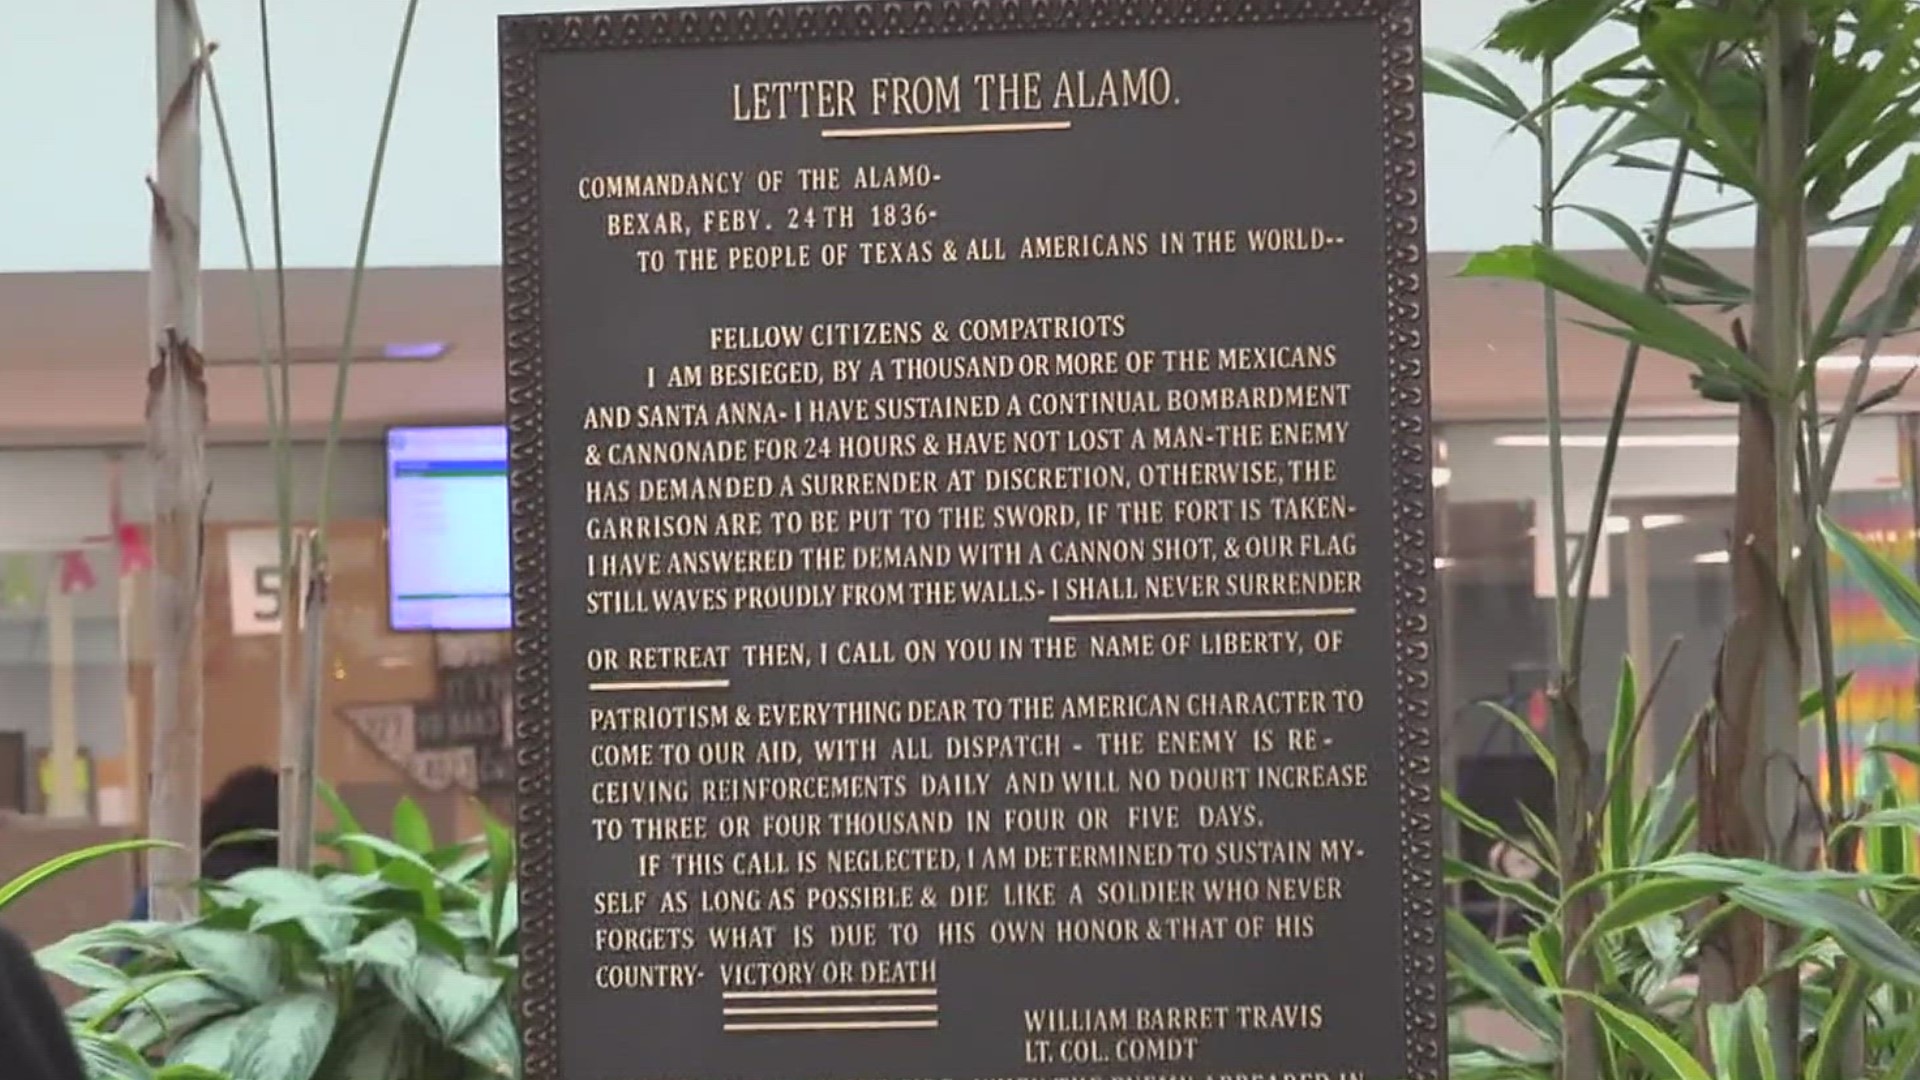 The Alamo Letter Society is working on getting replicas of the historic plaque in all 254 counties throughout Texas!